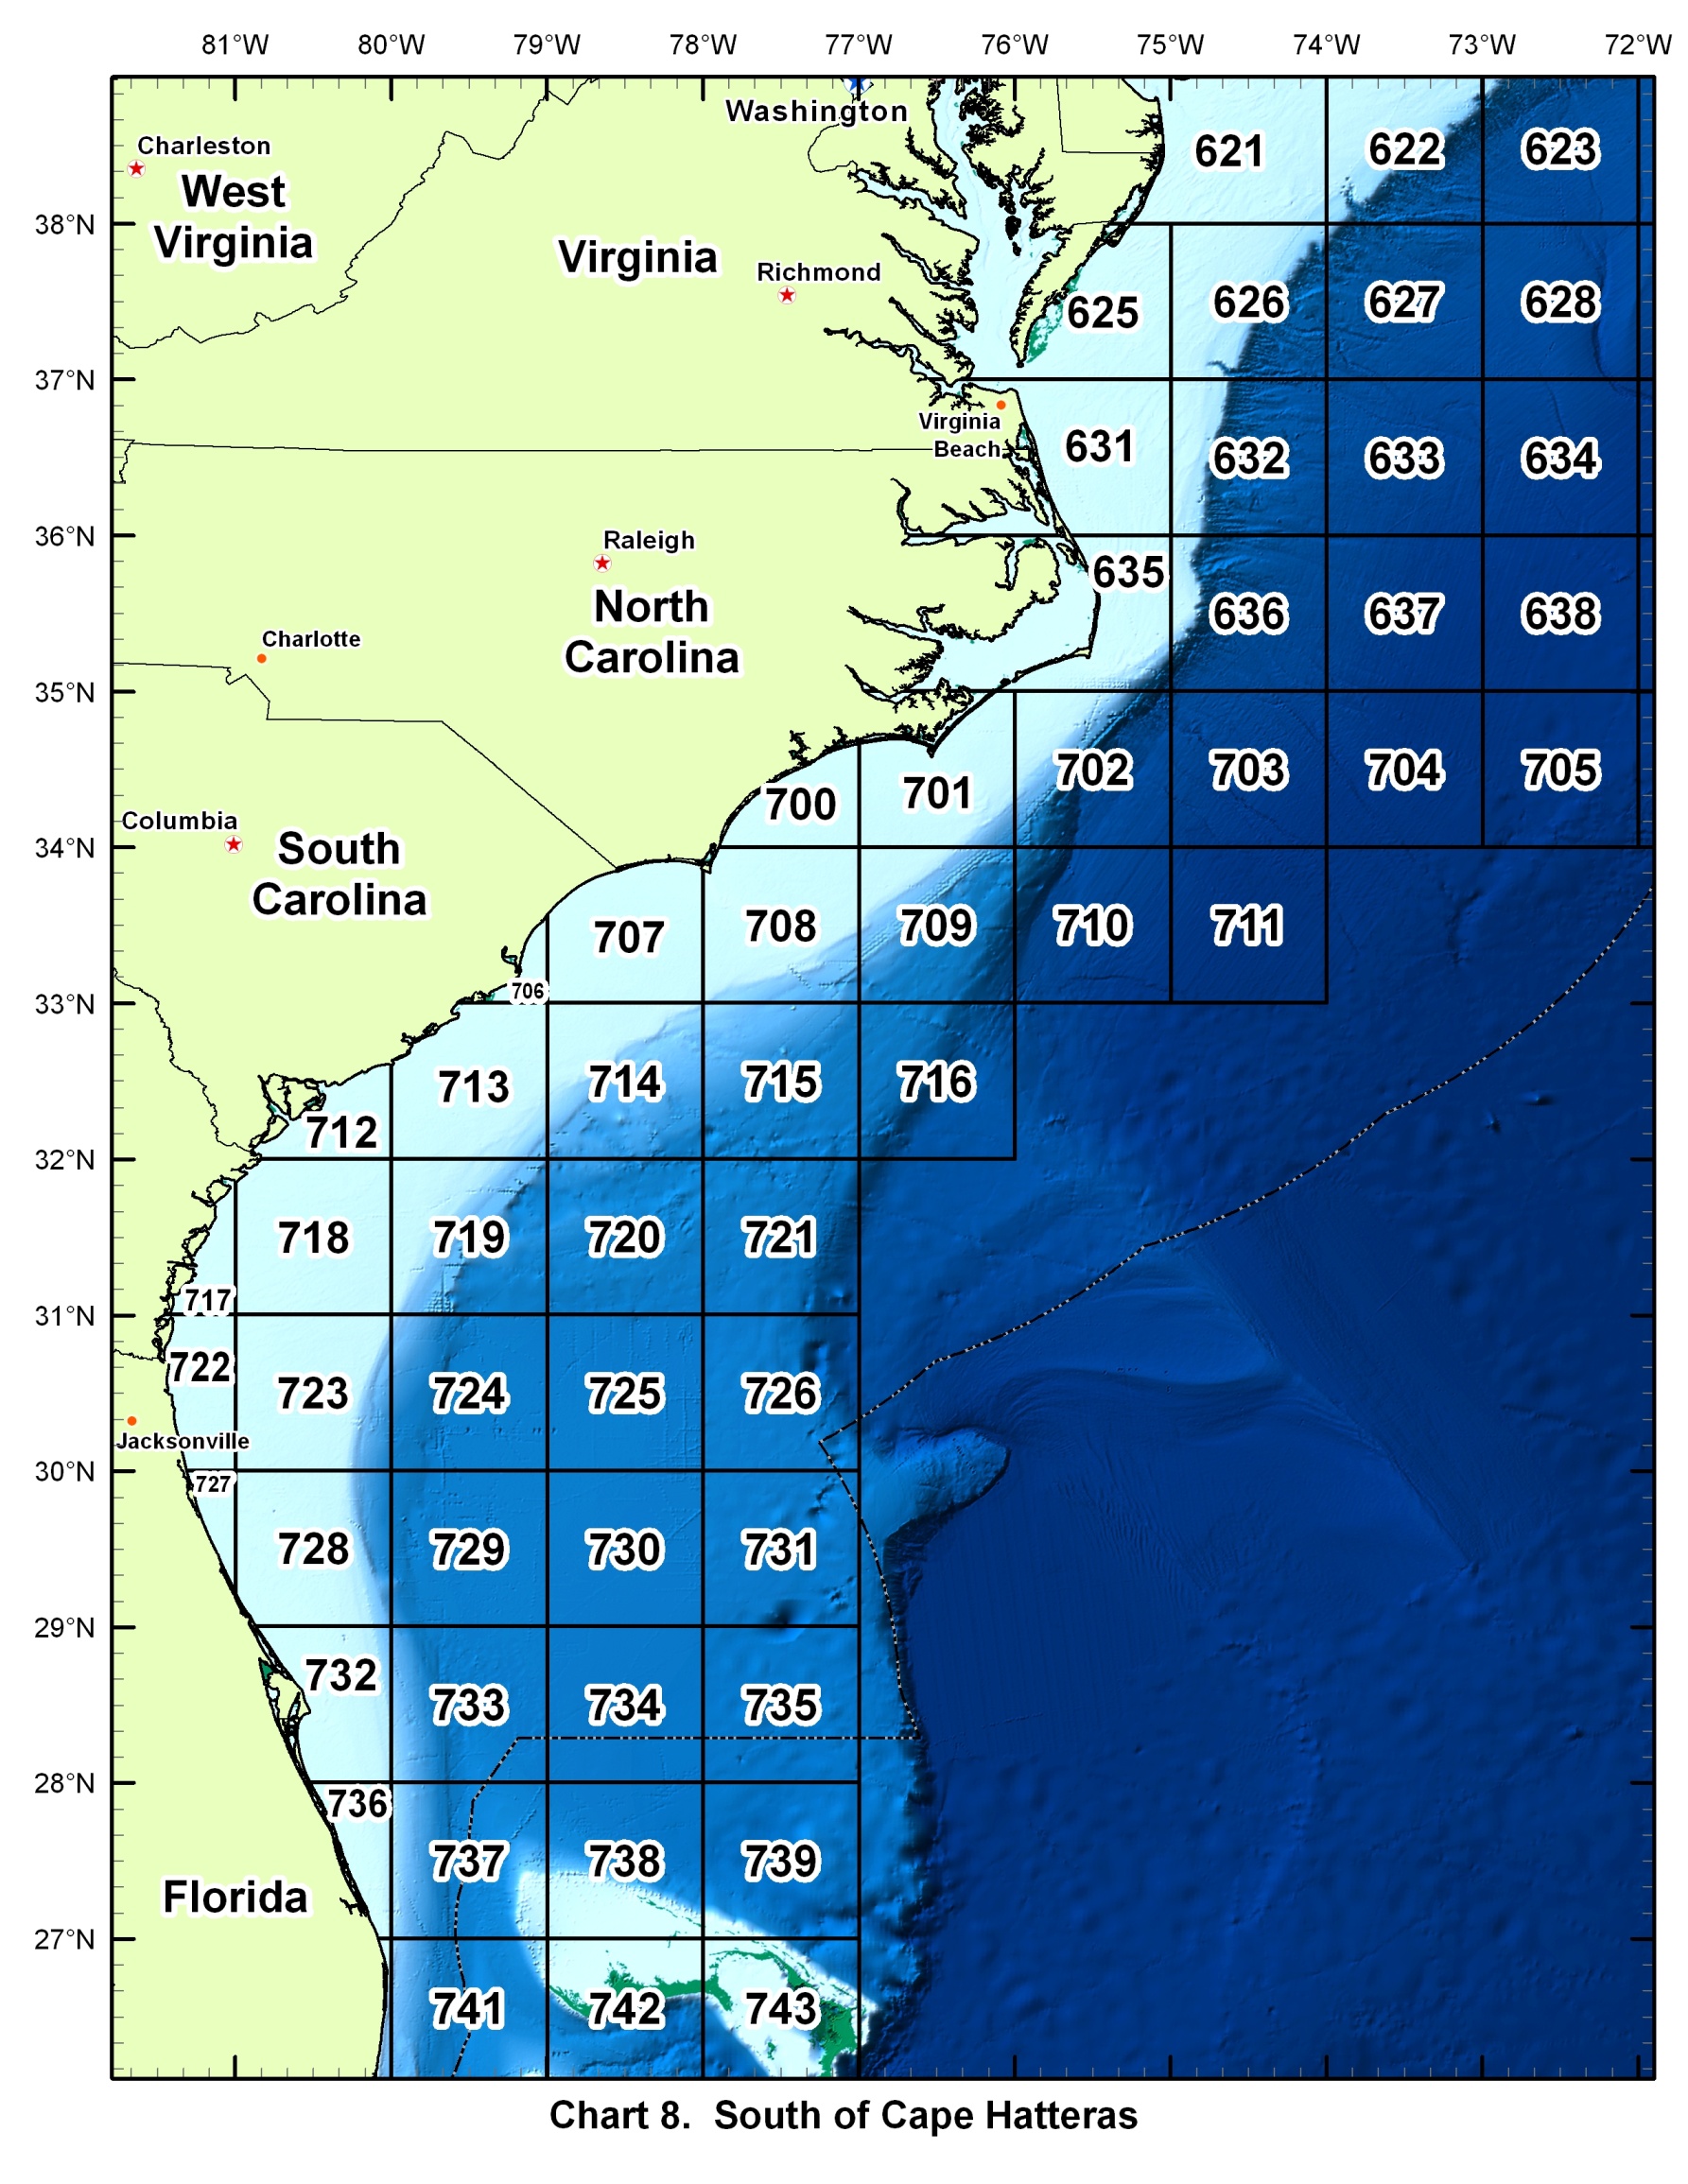 Chart 8 - South of Cape Hatteras